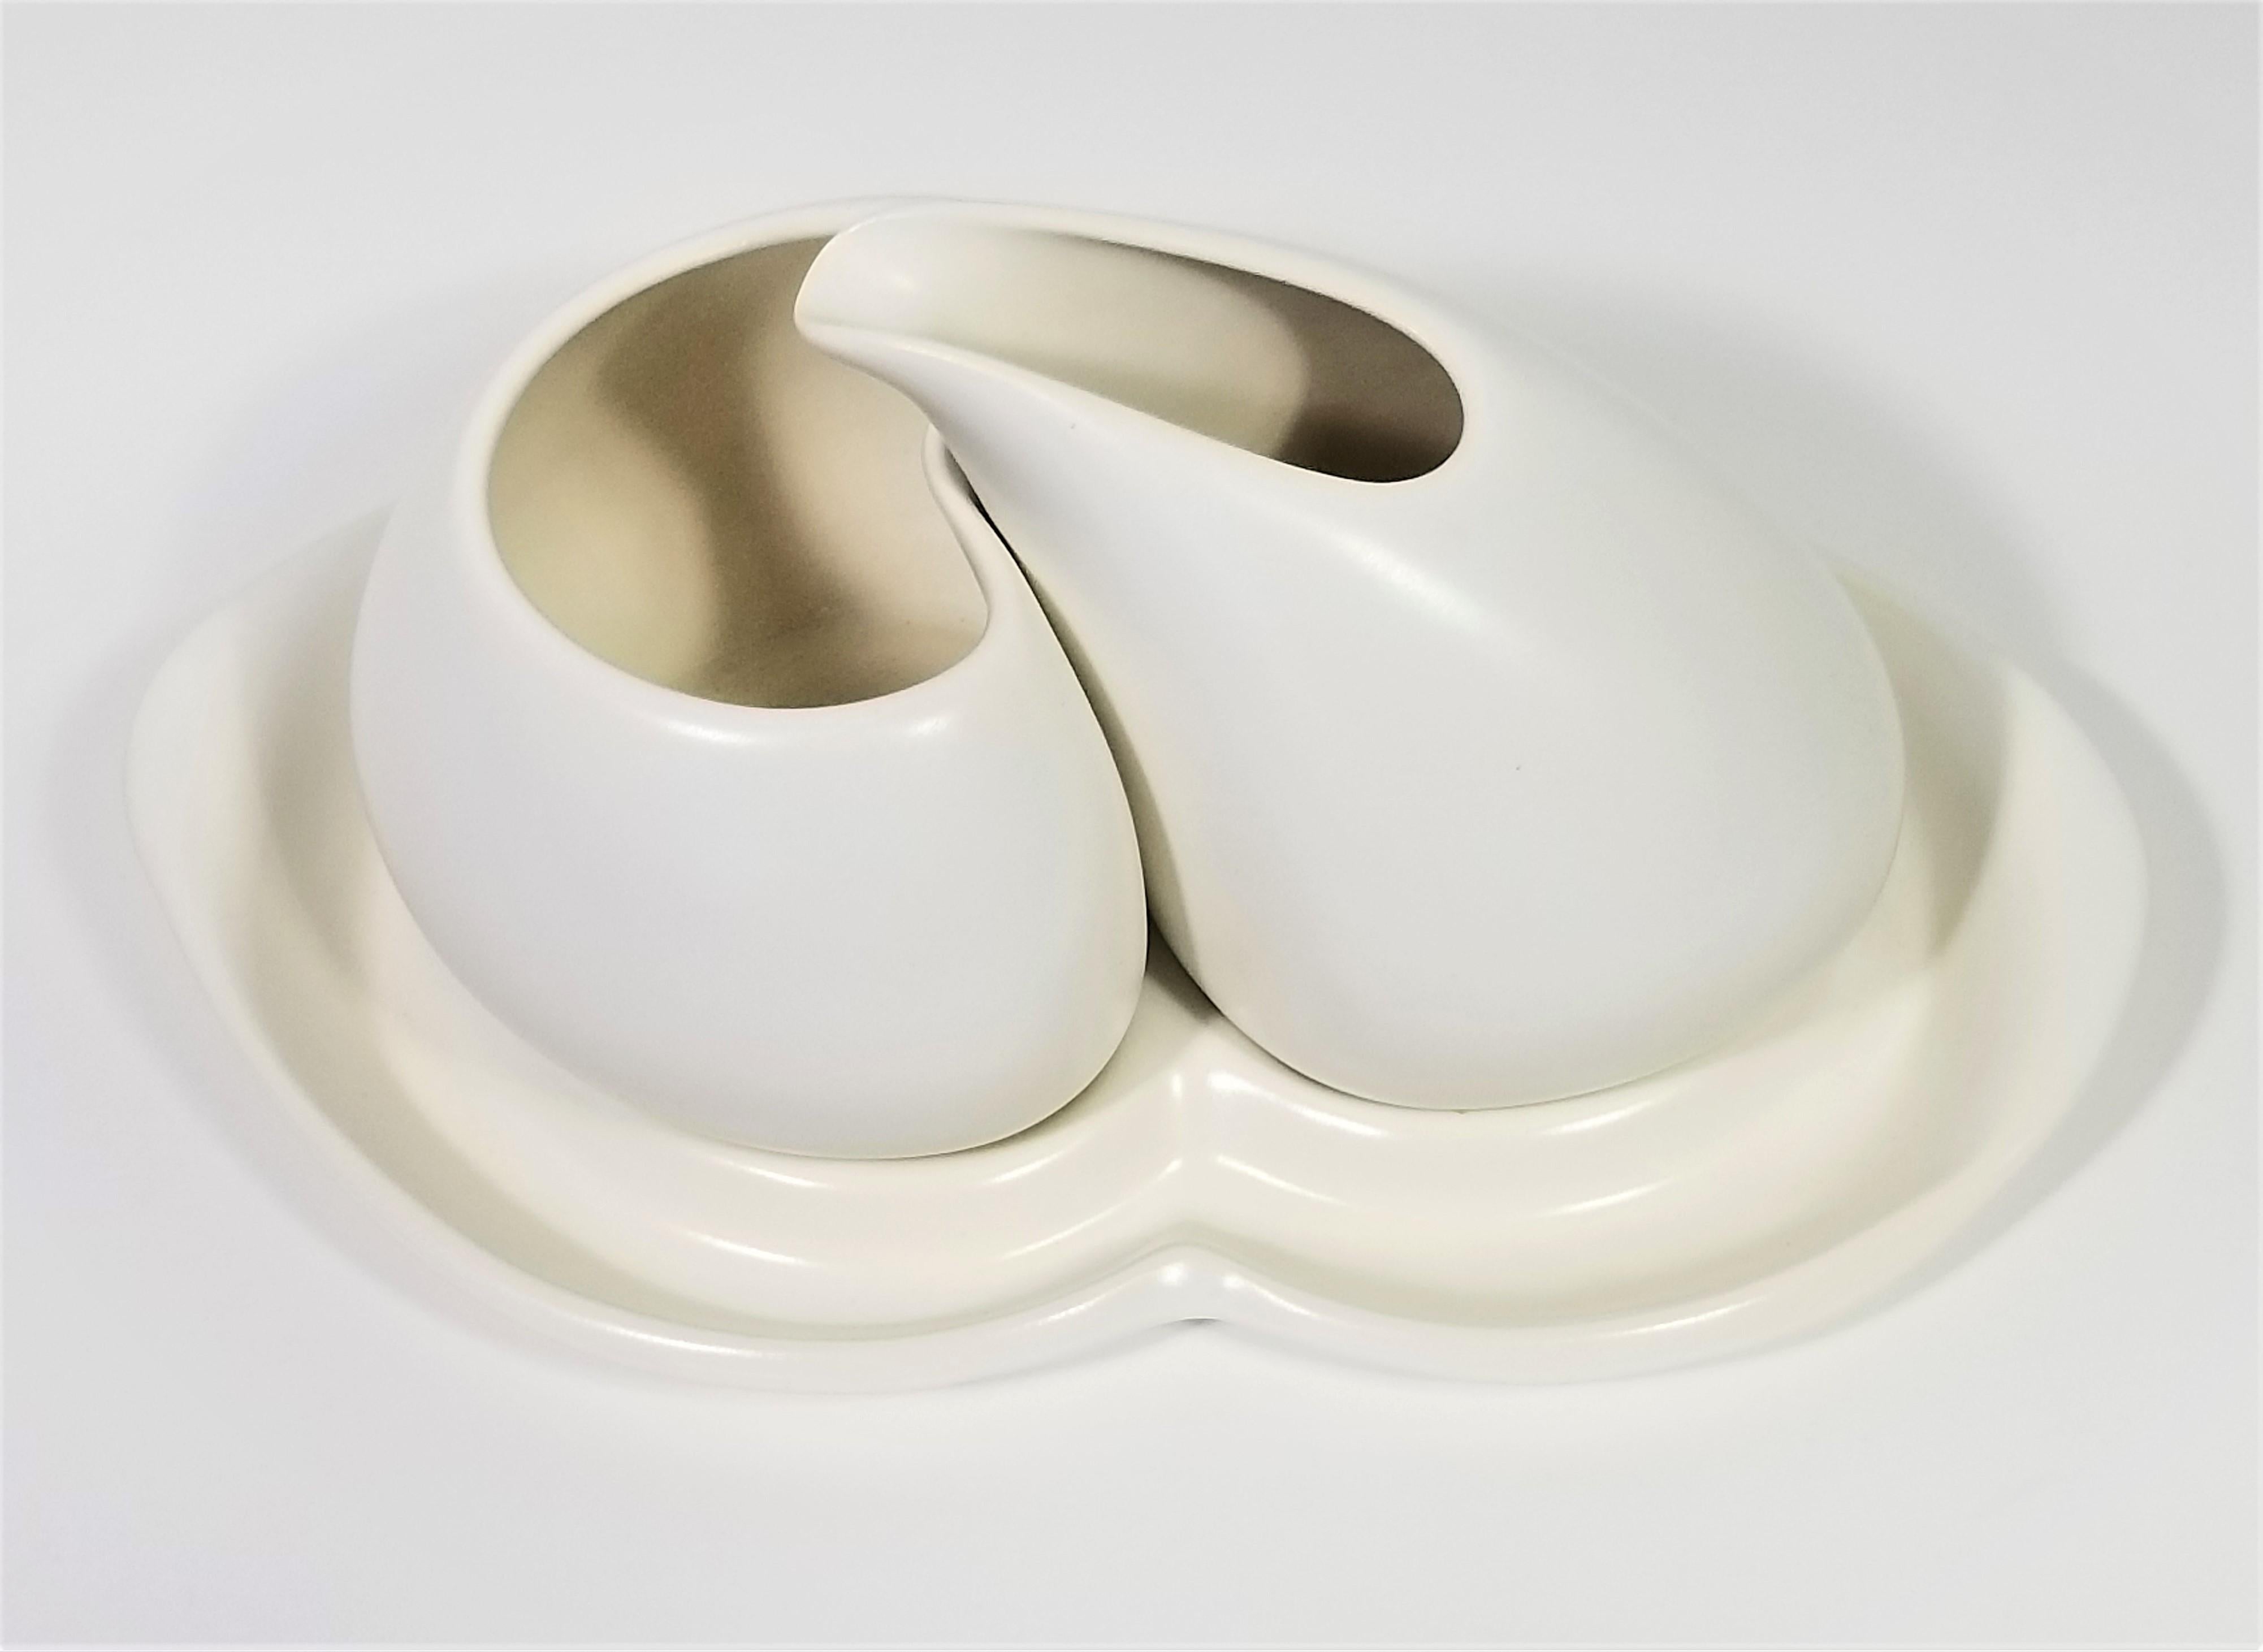 Porcelain Artist Signed Sculptural Modernist Cream and Sugar Set In Excellent Condition For Sale In New York, NY